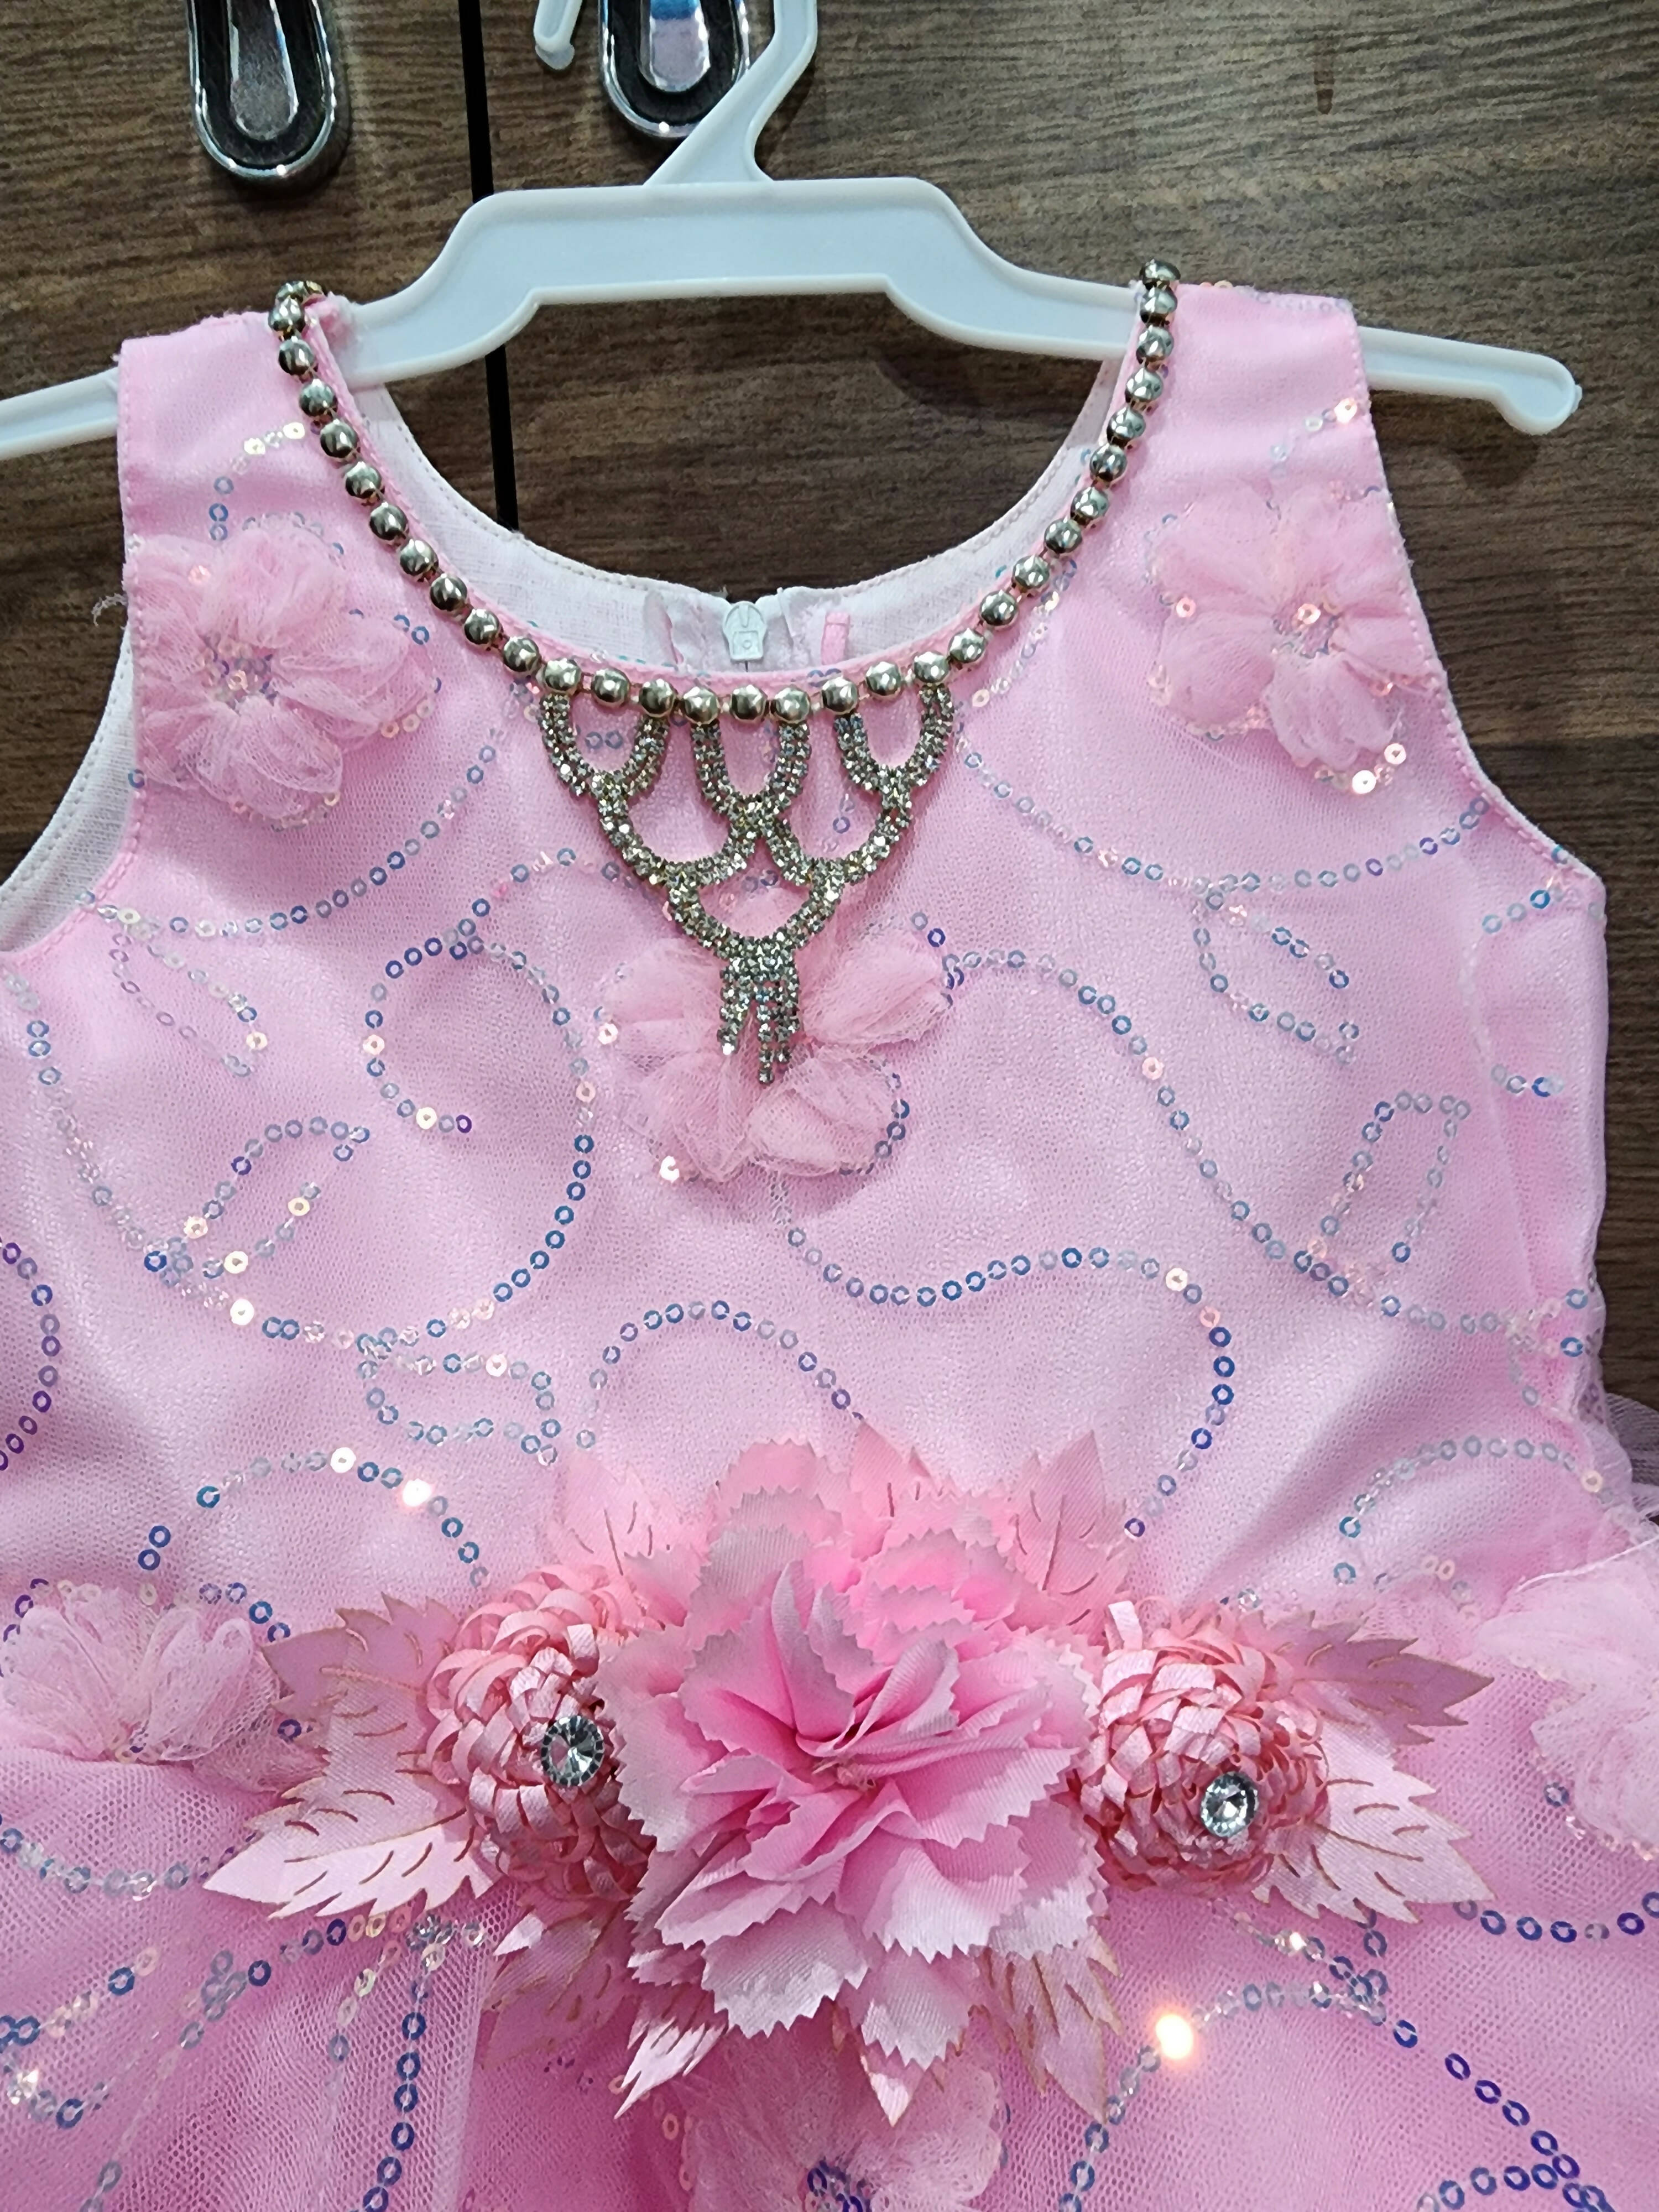 Pink princess frock - 1st Birthday Frock